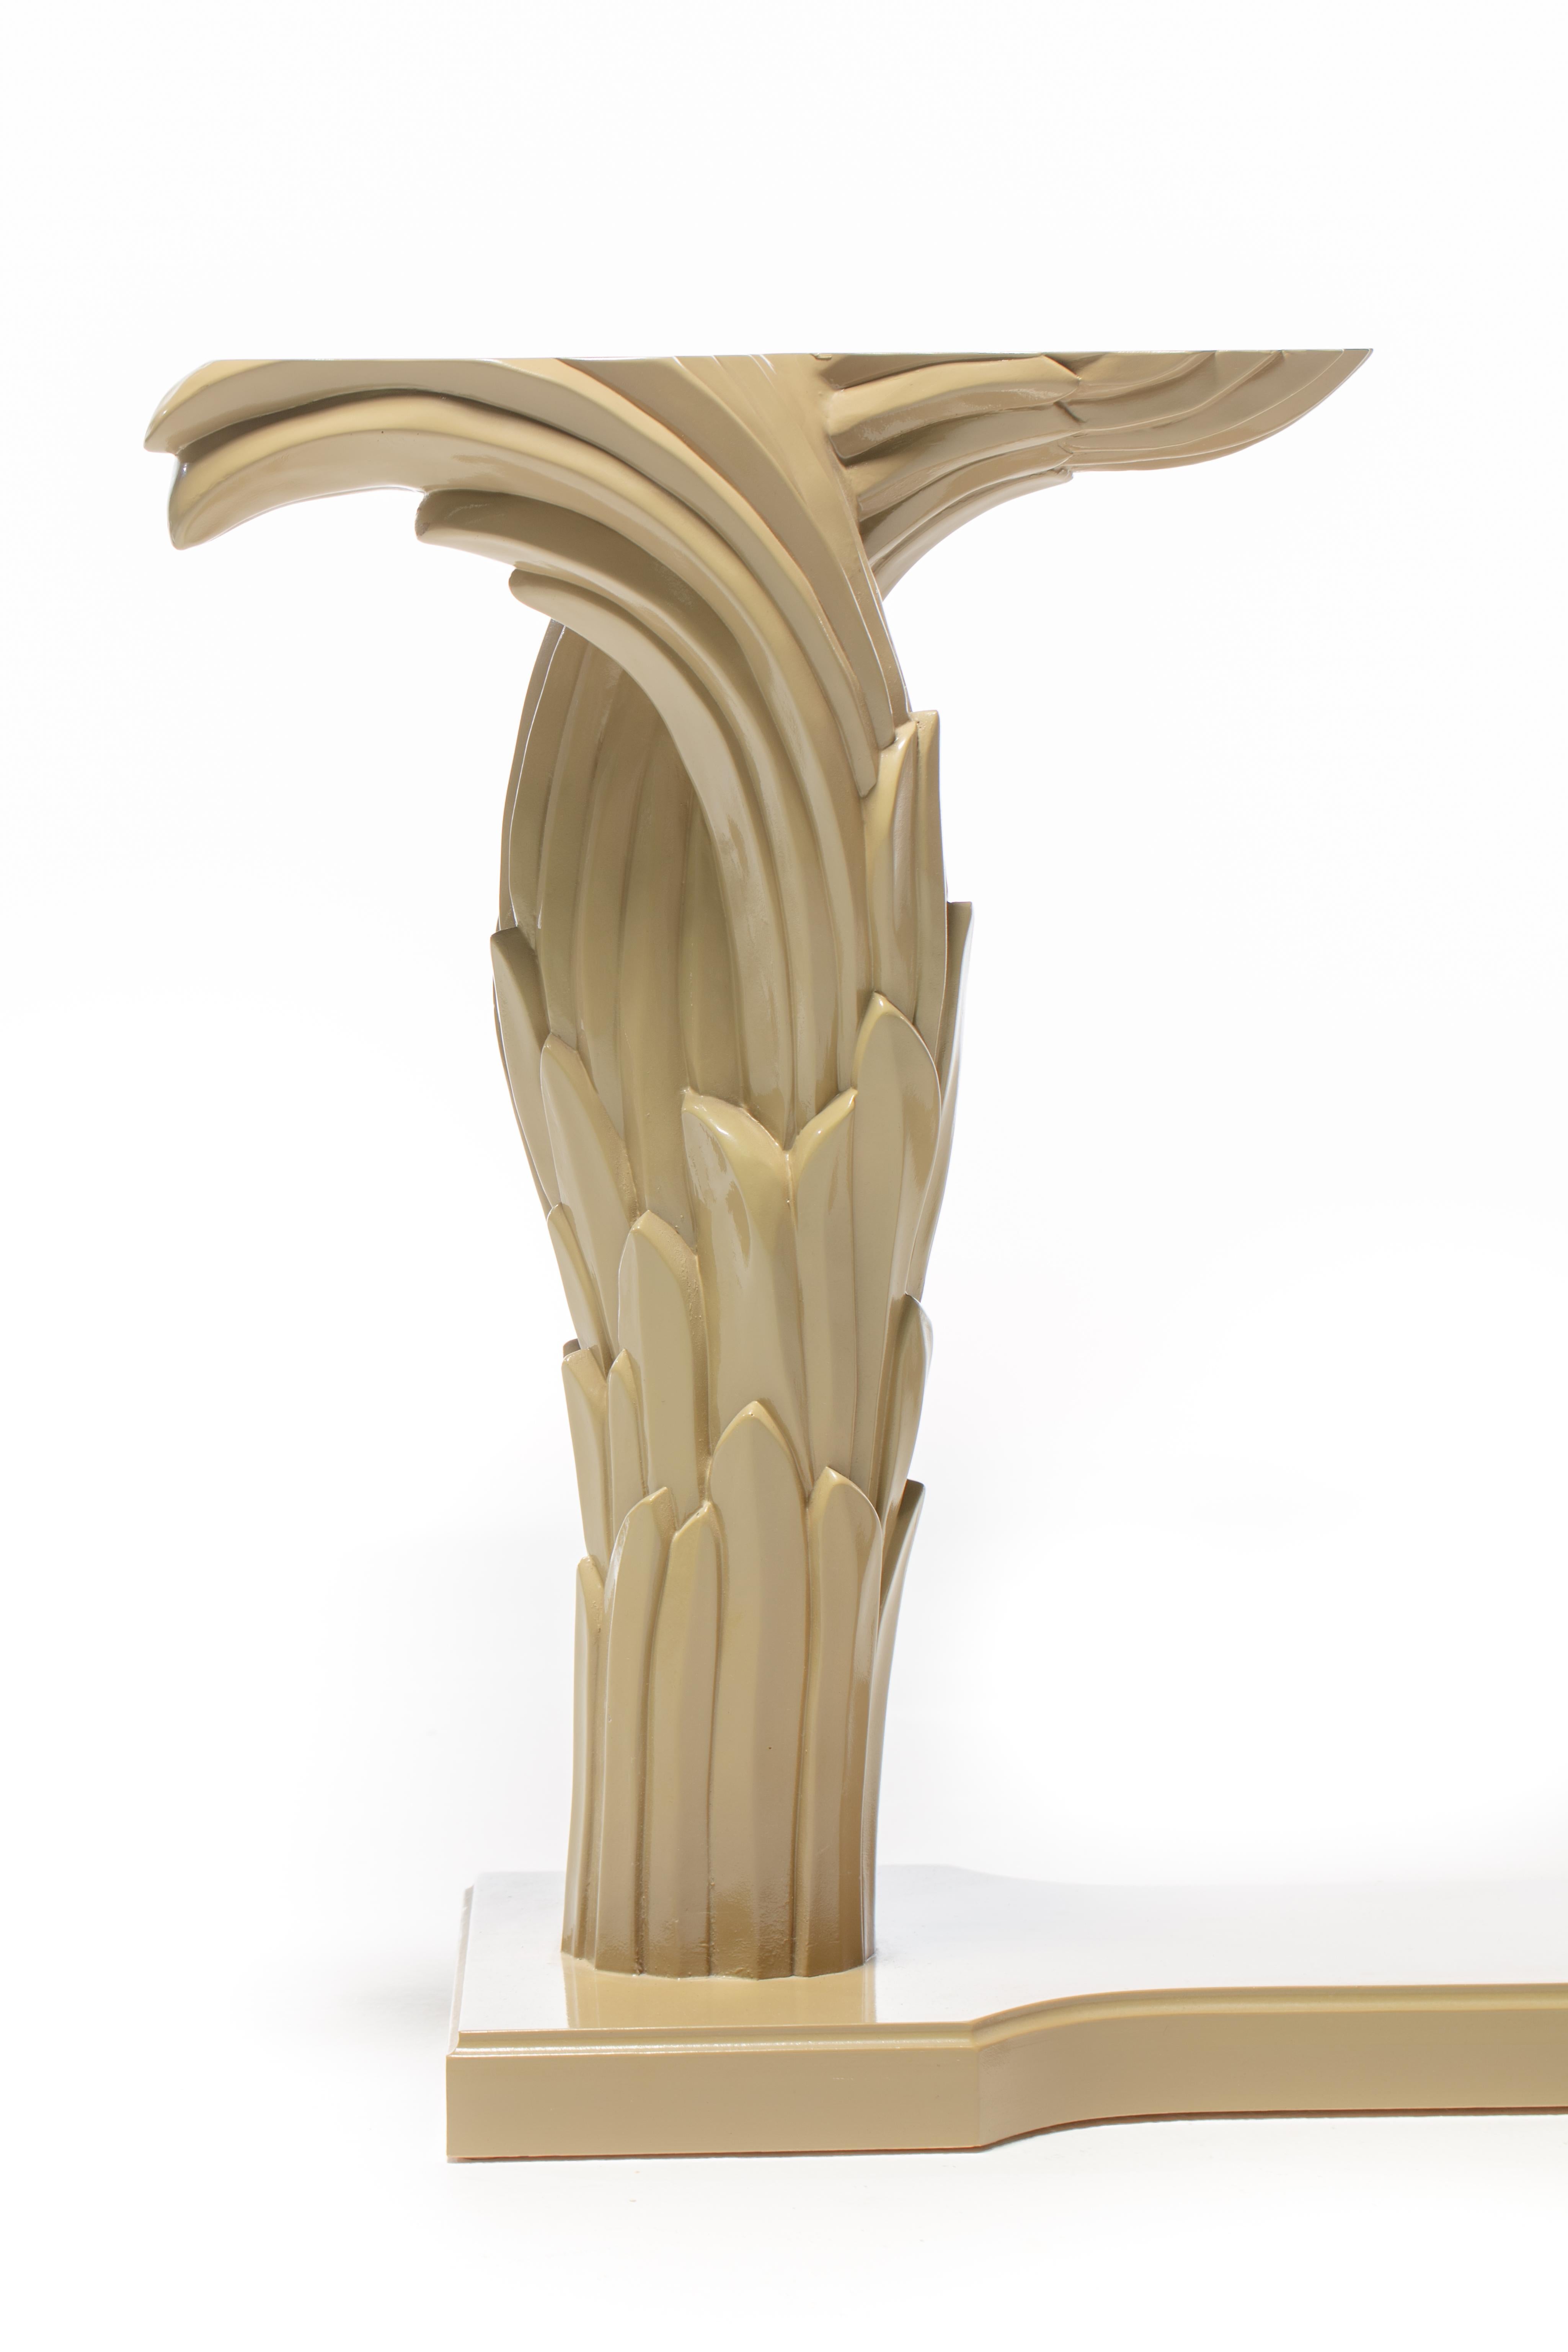 Art Deco Serge Roche Style Palm Leaf Console Lacquered in Almond Latte c. 1980 For Sale 3